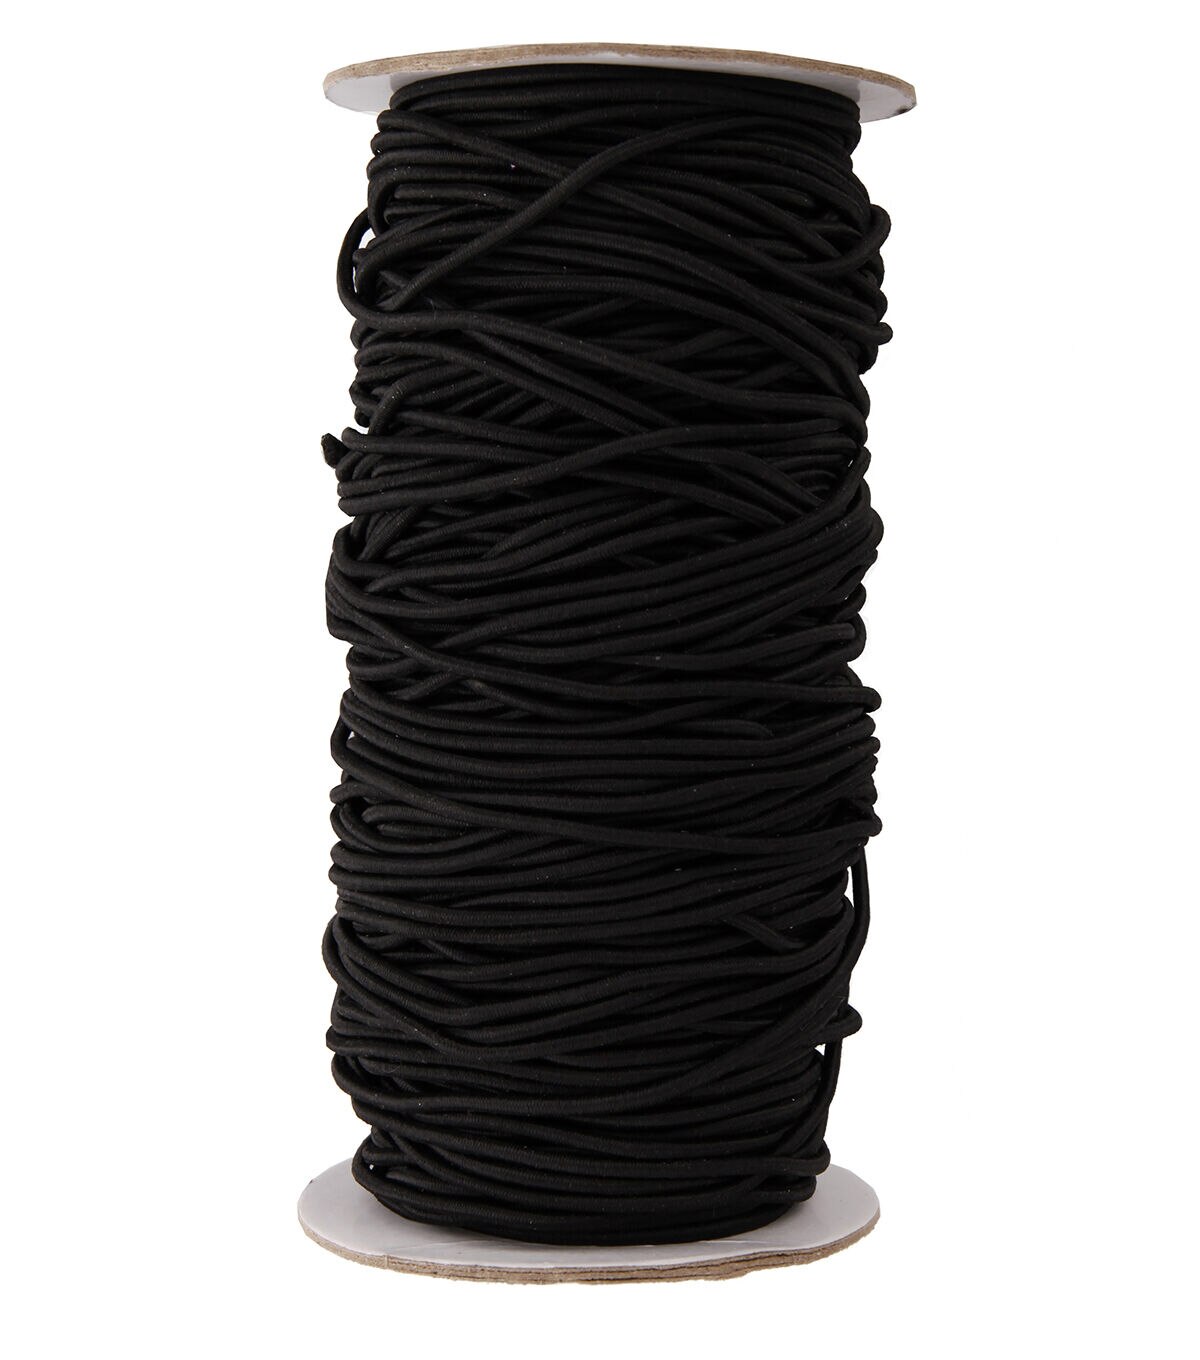 2mm Black Elastic Corded Round Shock String Stretchable Sewing Tailoring 150m 